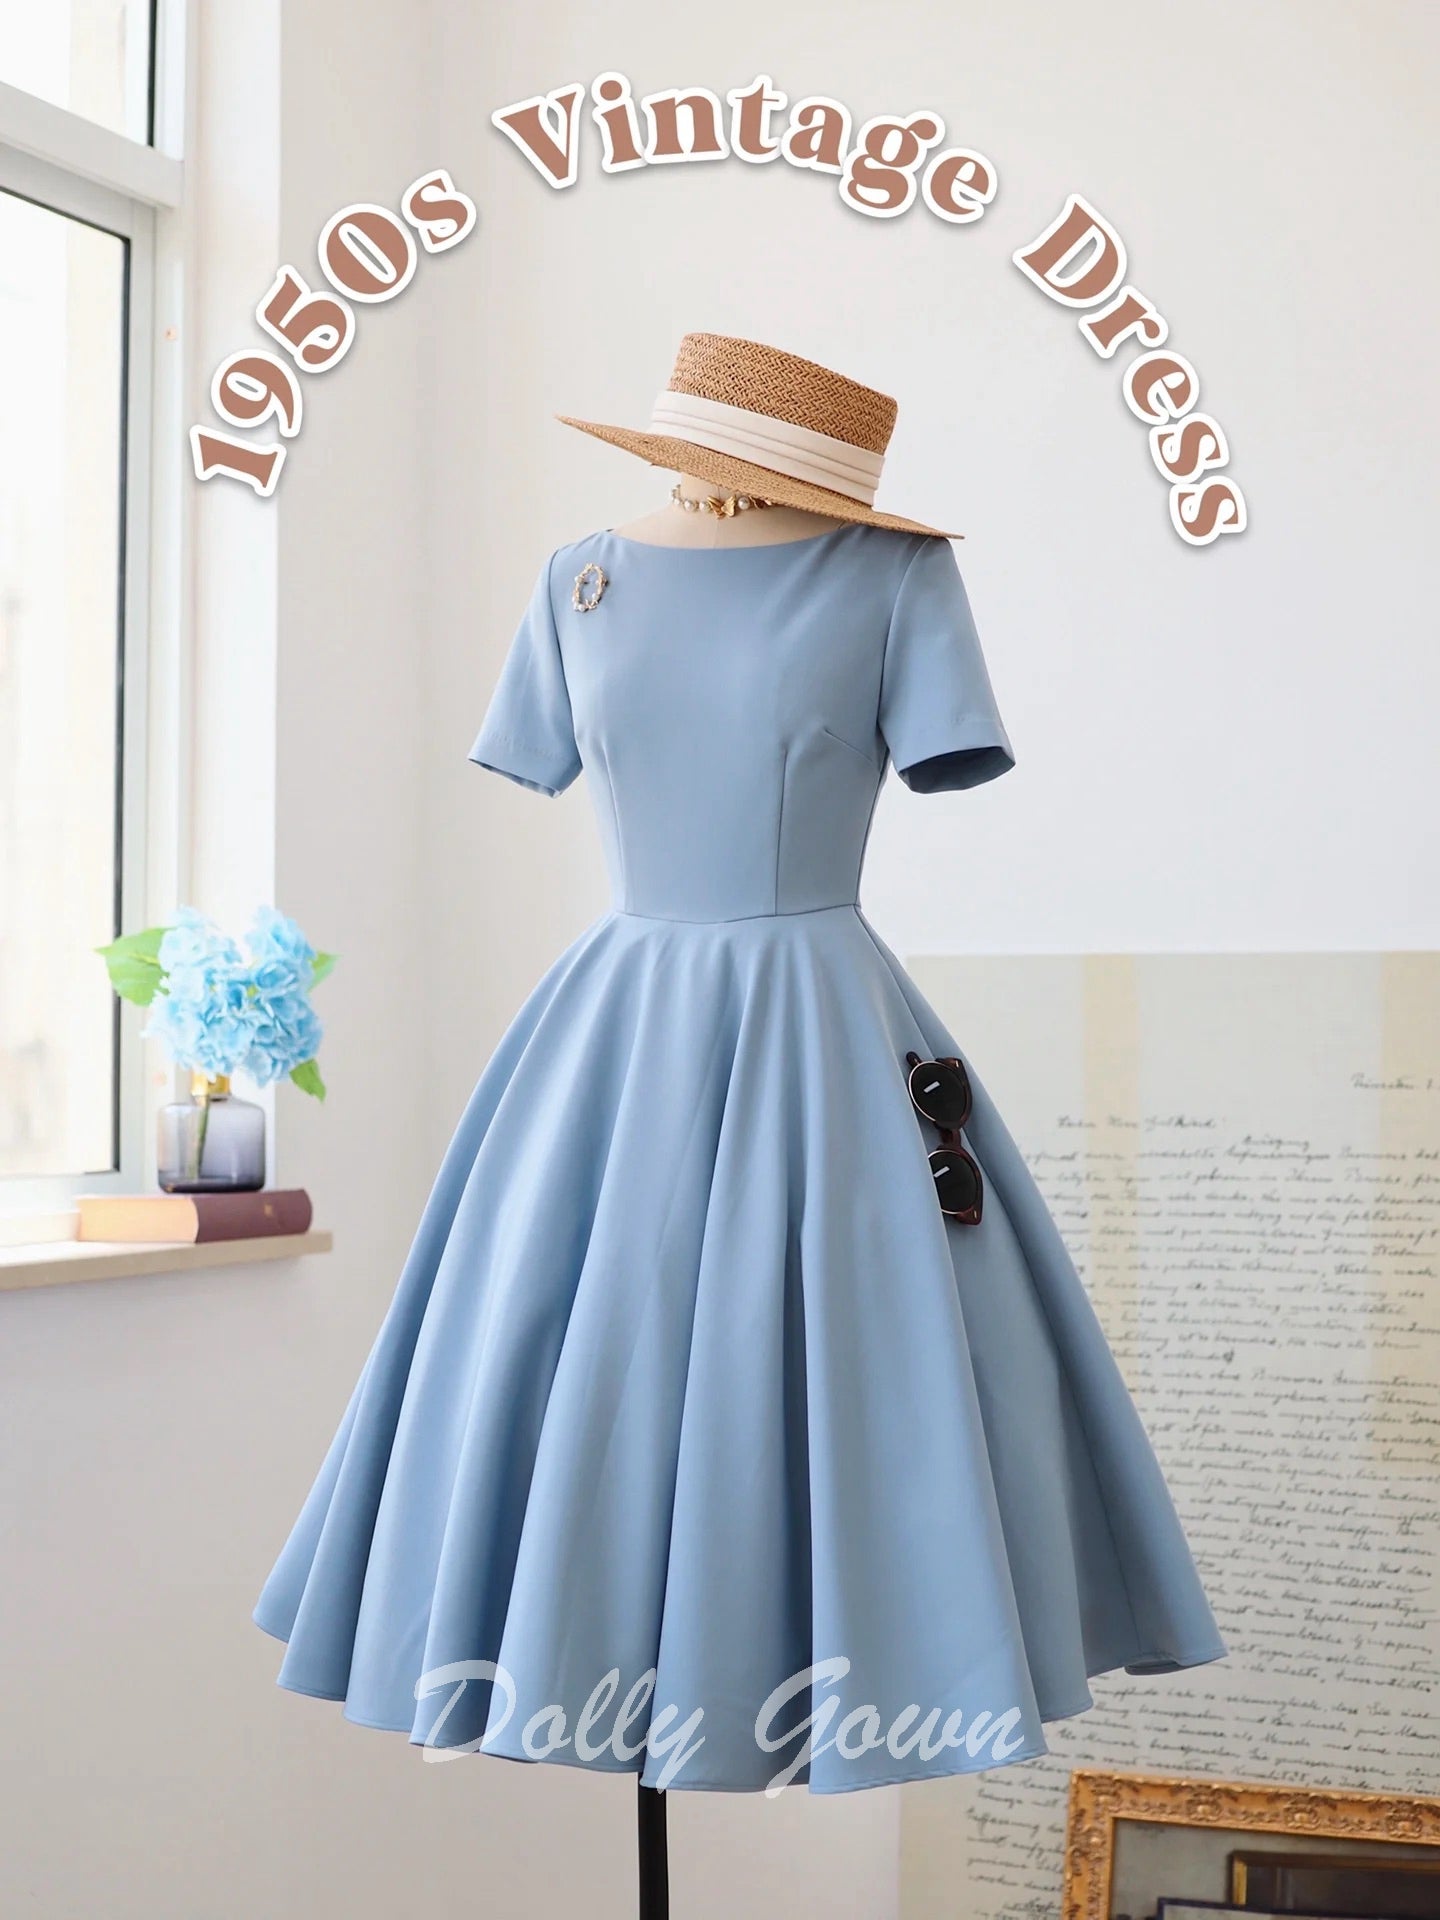 Light Blue Short 1950s Vintage Style Dress with Short Sleeves- DollyGown